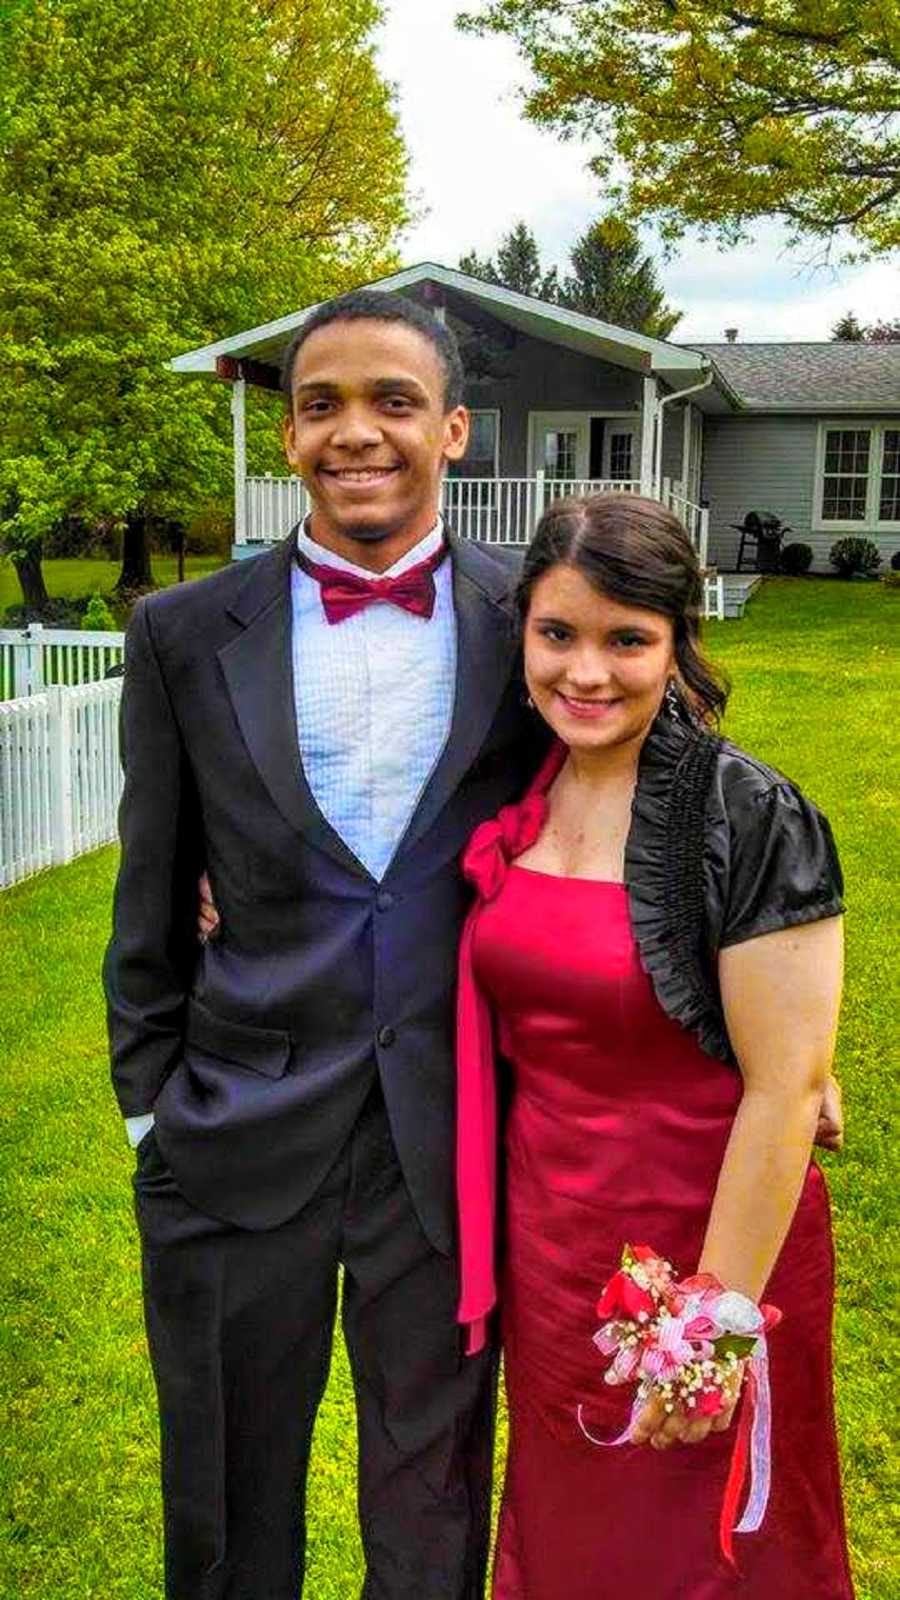 Mixed race high school couple stand smiling outside dressed for prom